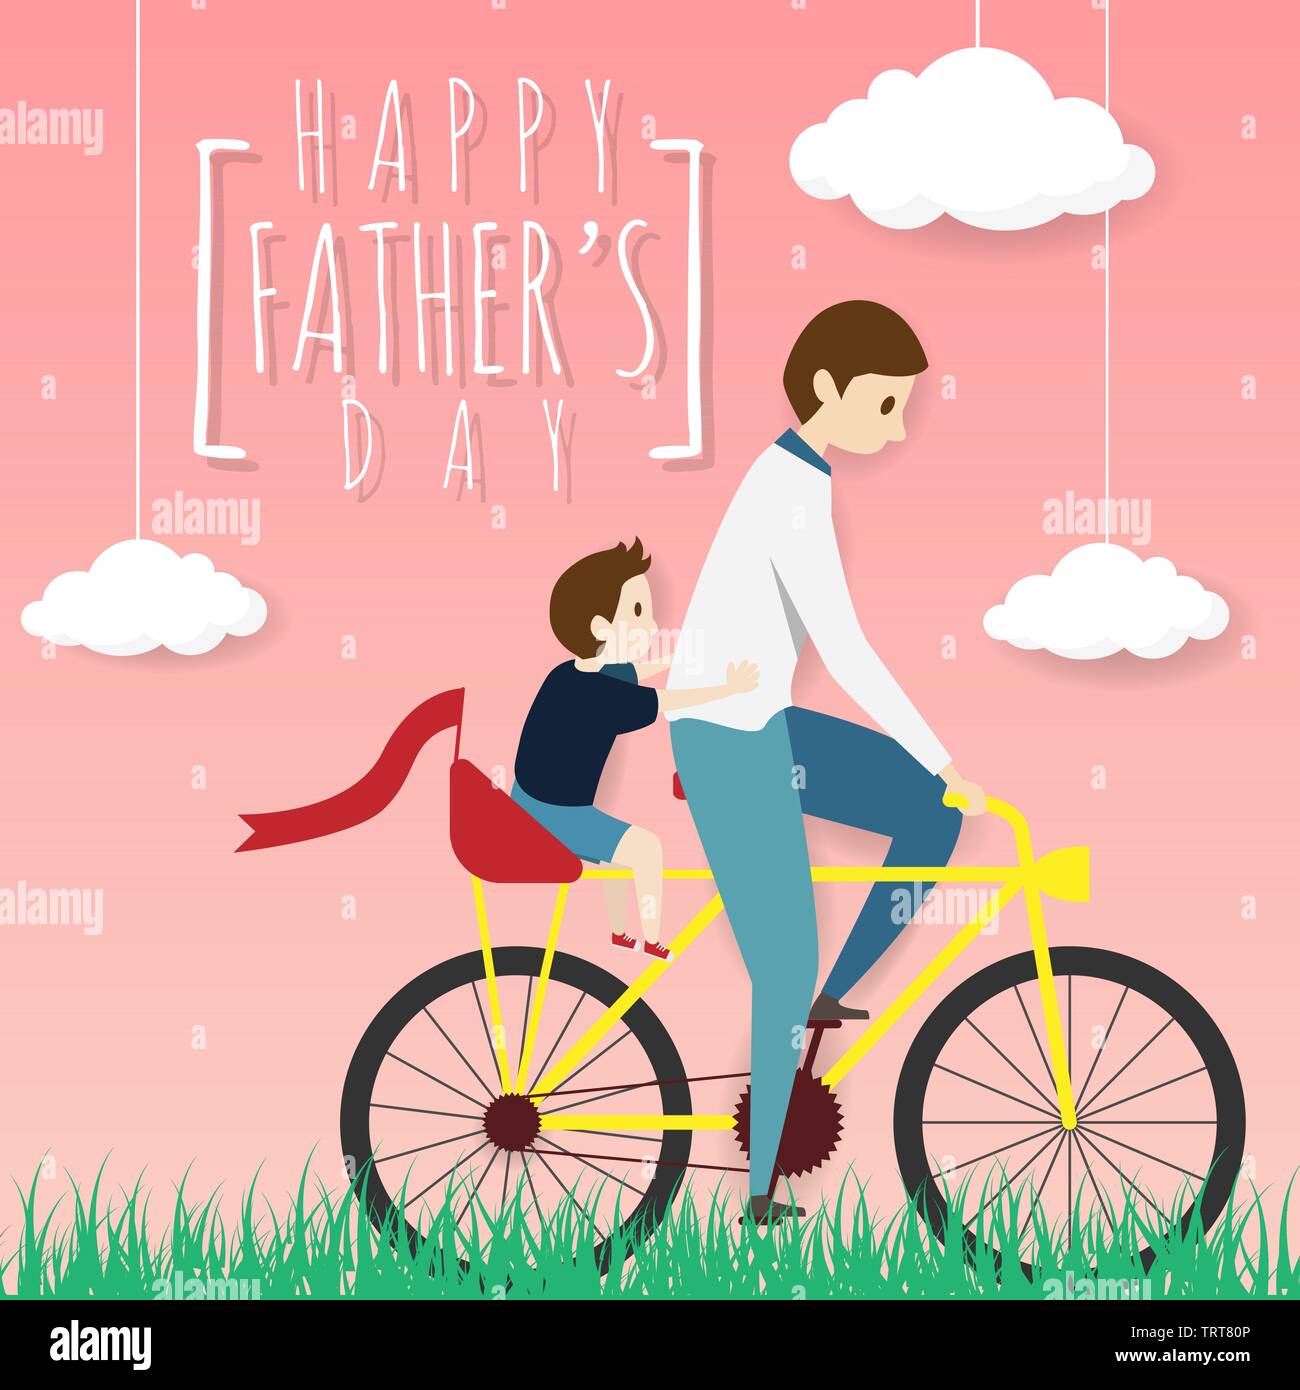 vector of happy father's day greeting card. father biking bicycle with his son ride on a pillion, riding in the grass field with white cloud on pink b Stock Vector